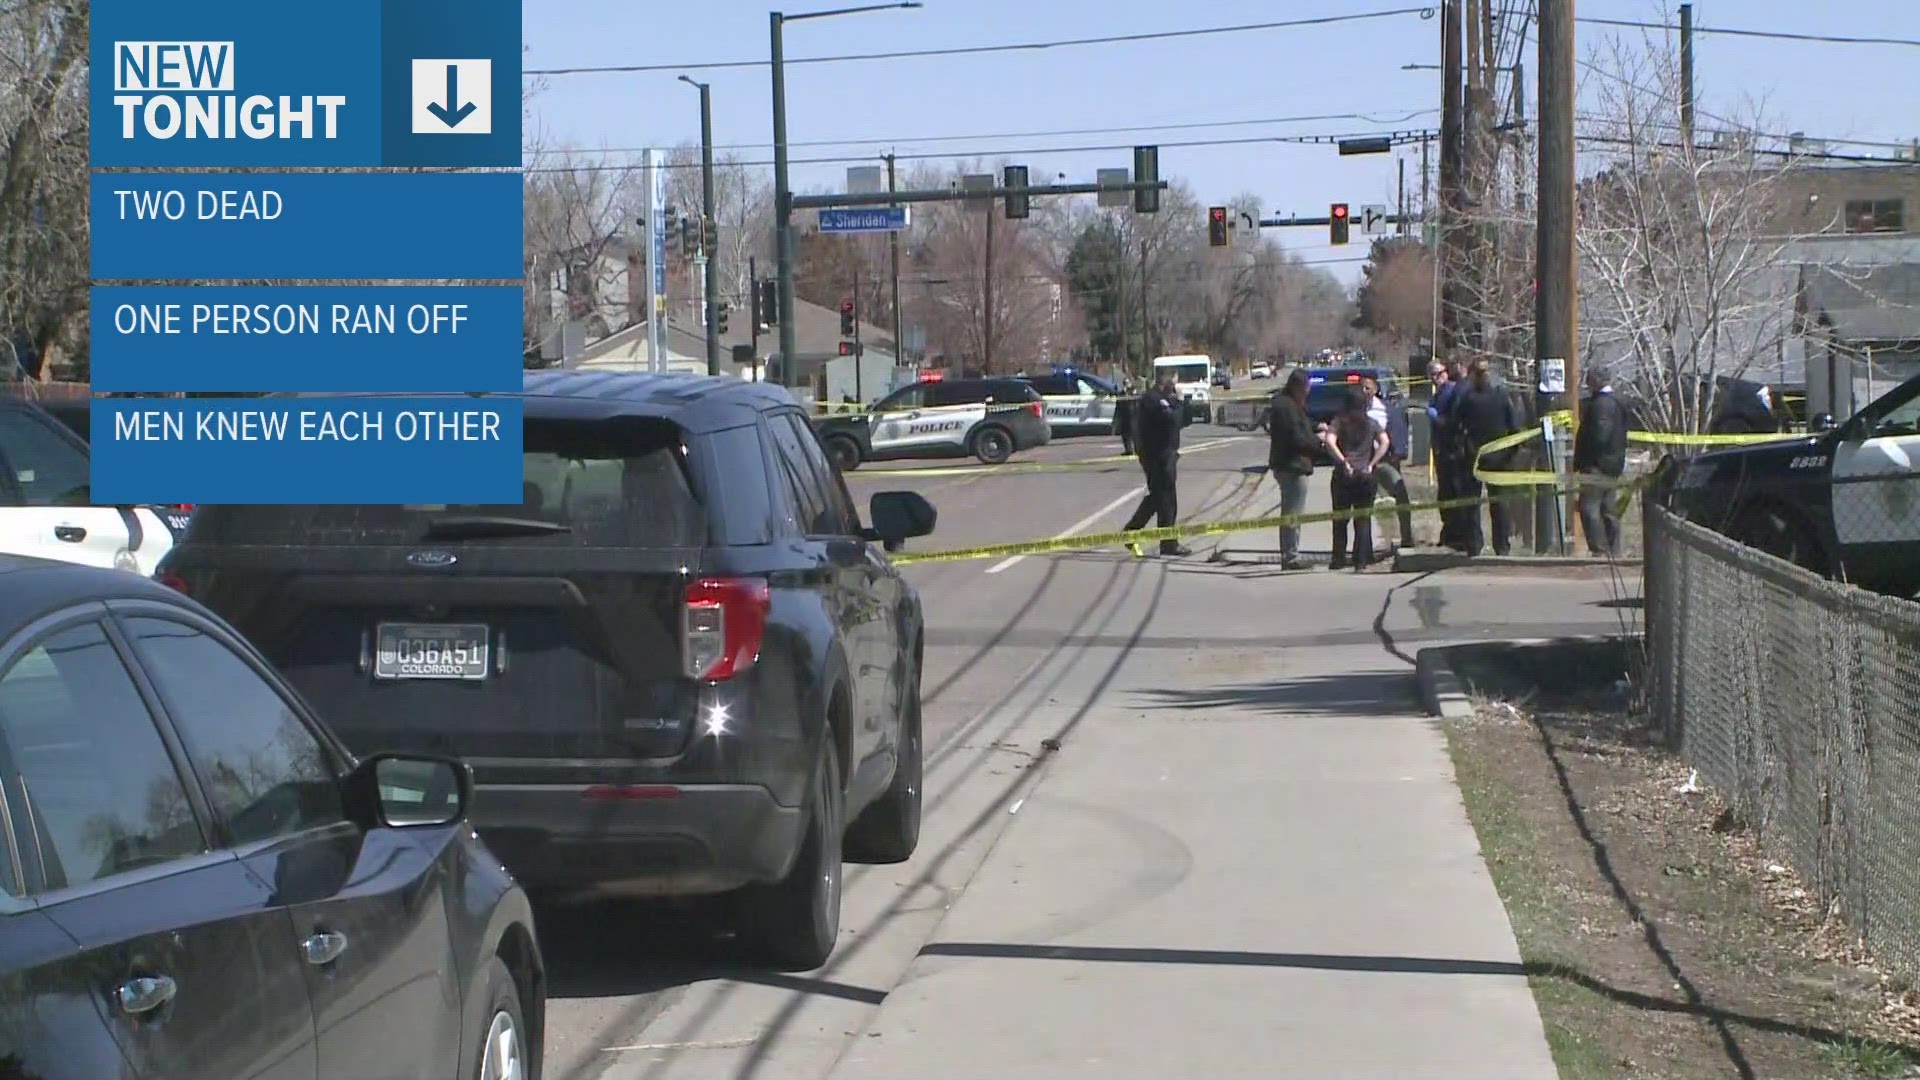 The shooting happened just before noon in the 5200 block of West 14th Avenue, which is near Sheridan Boulevard.